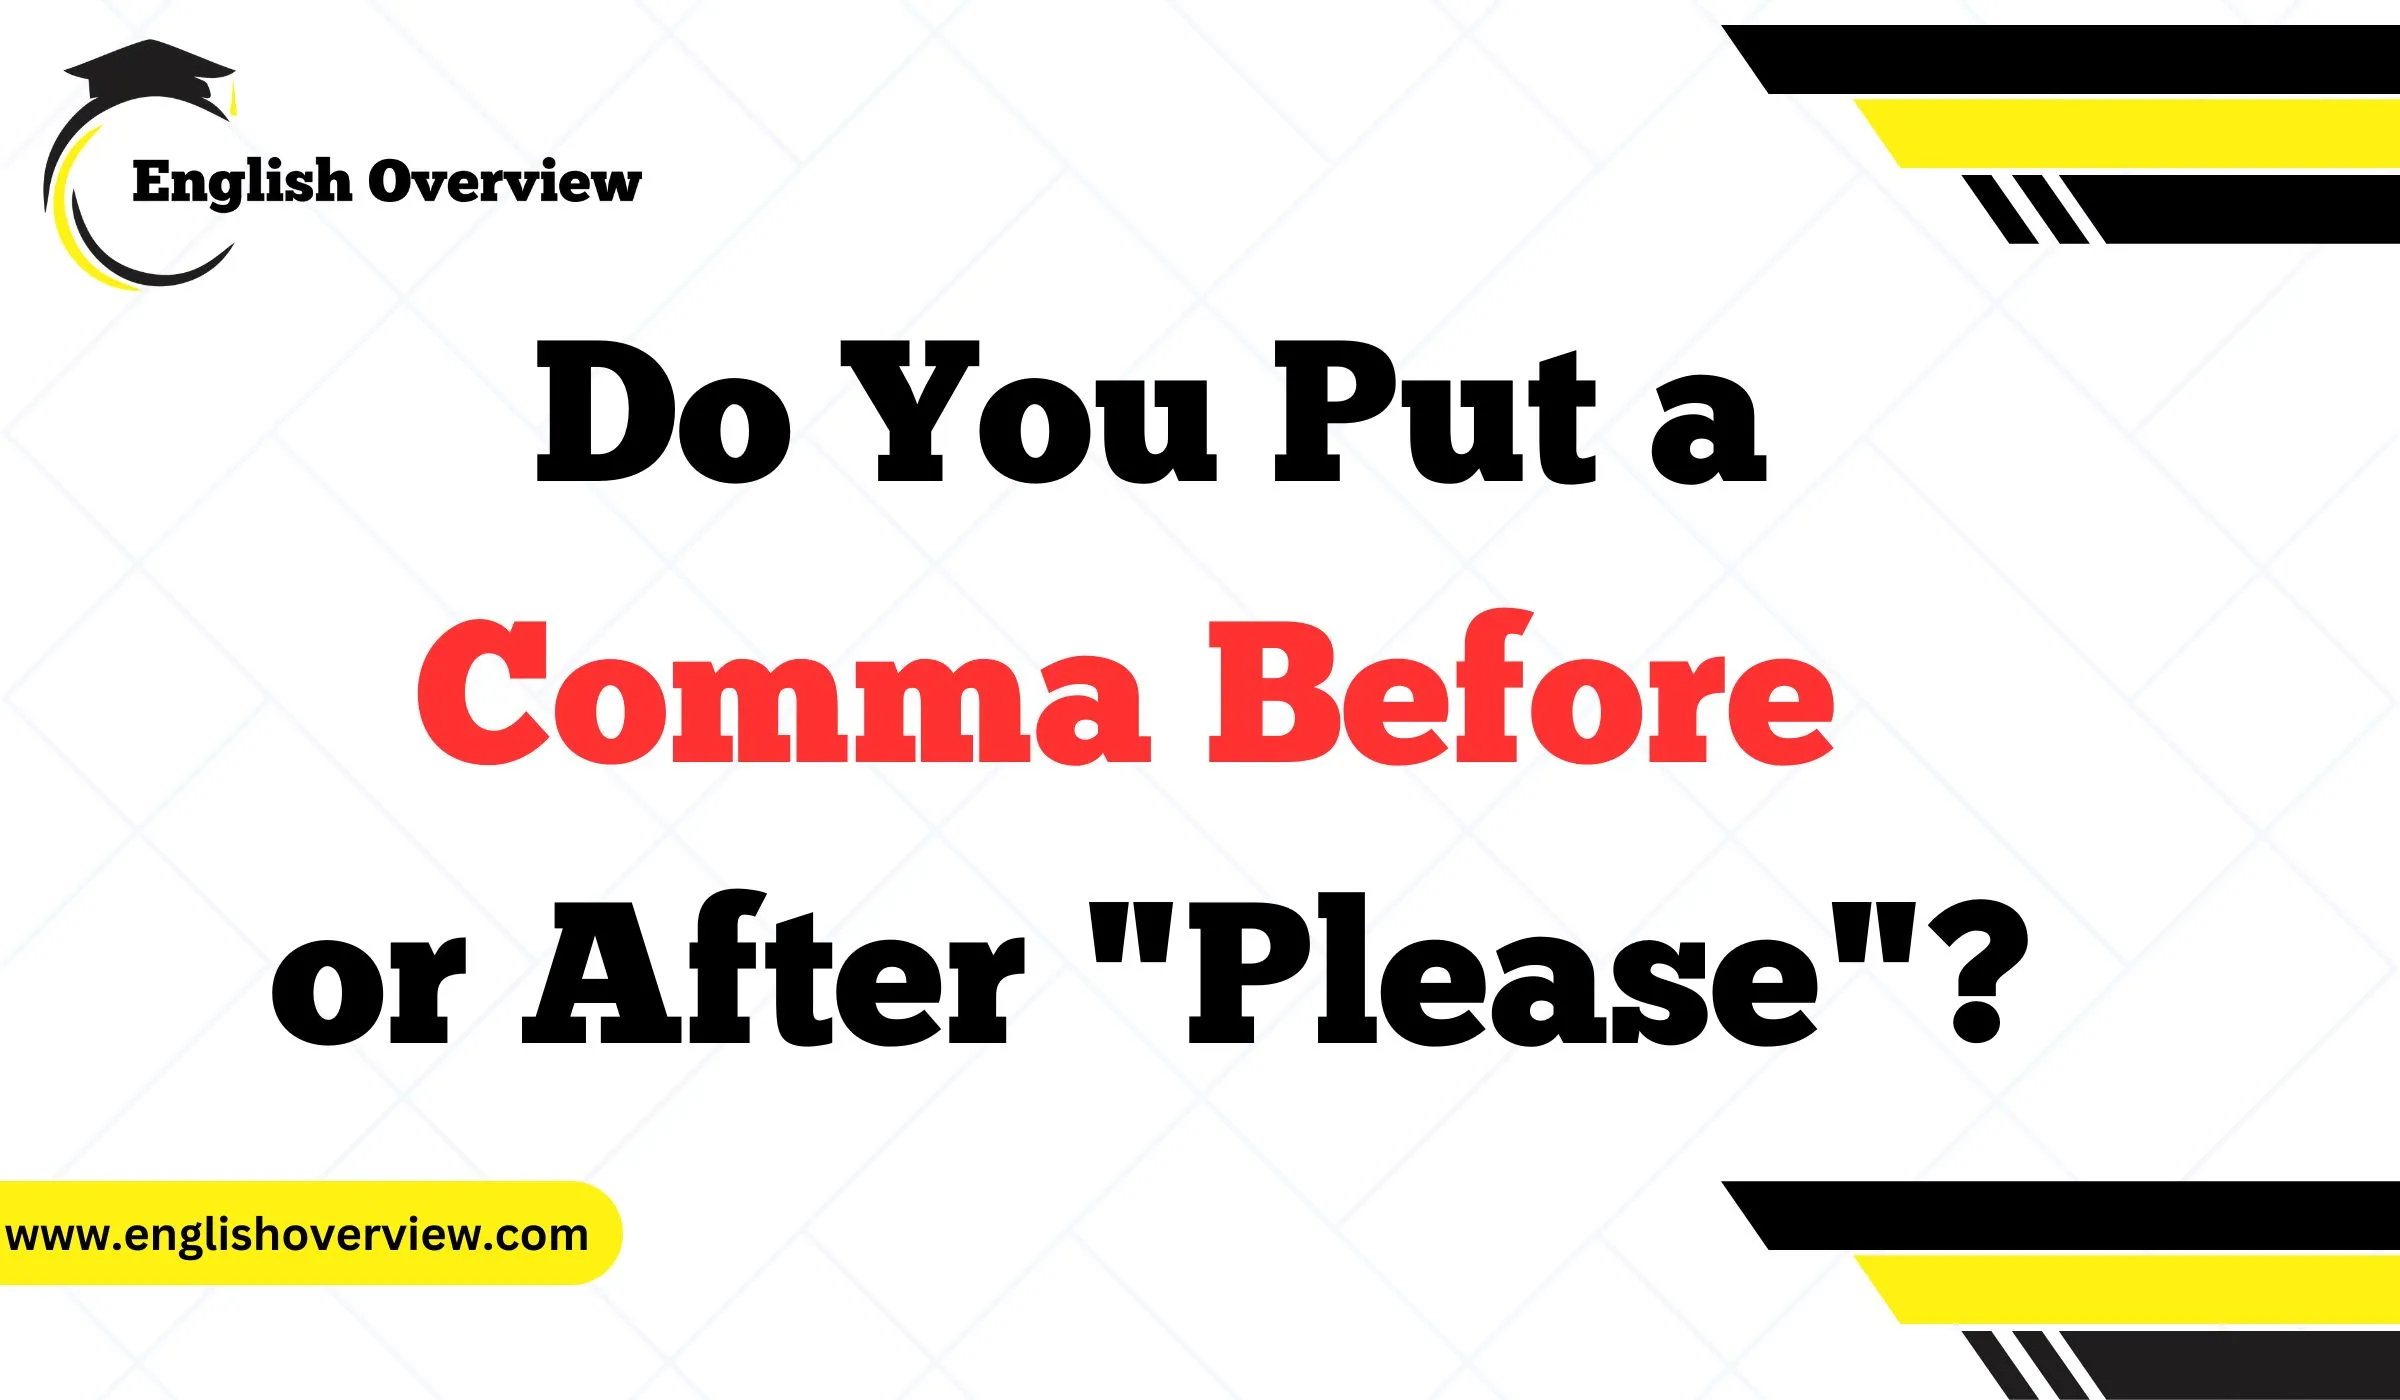 Do You Put a Comma Before or After "Please"